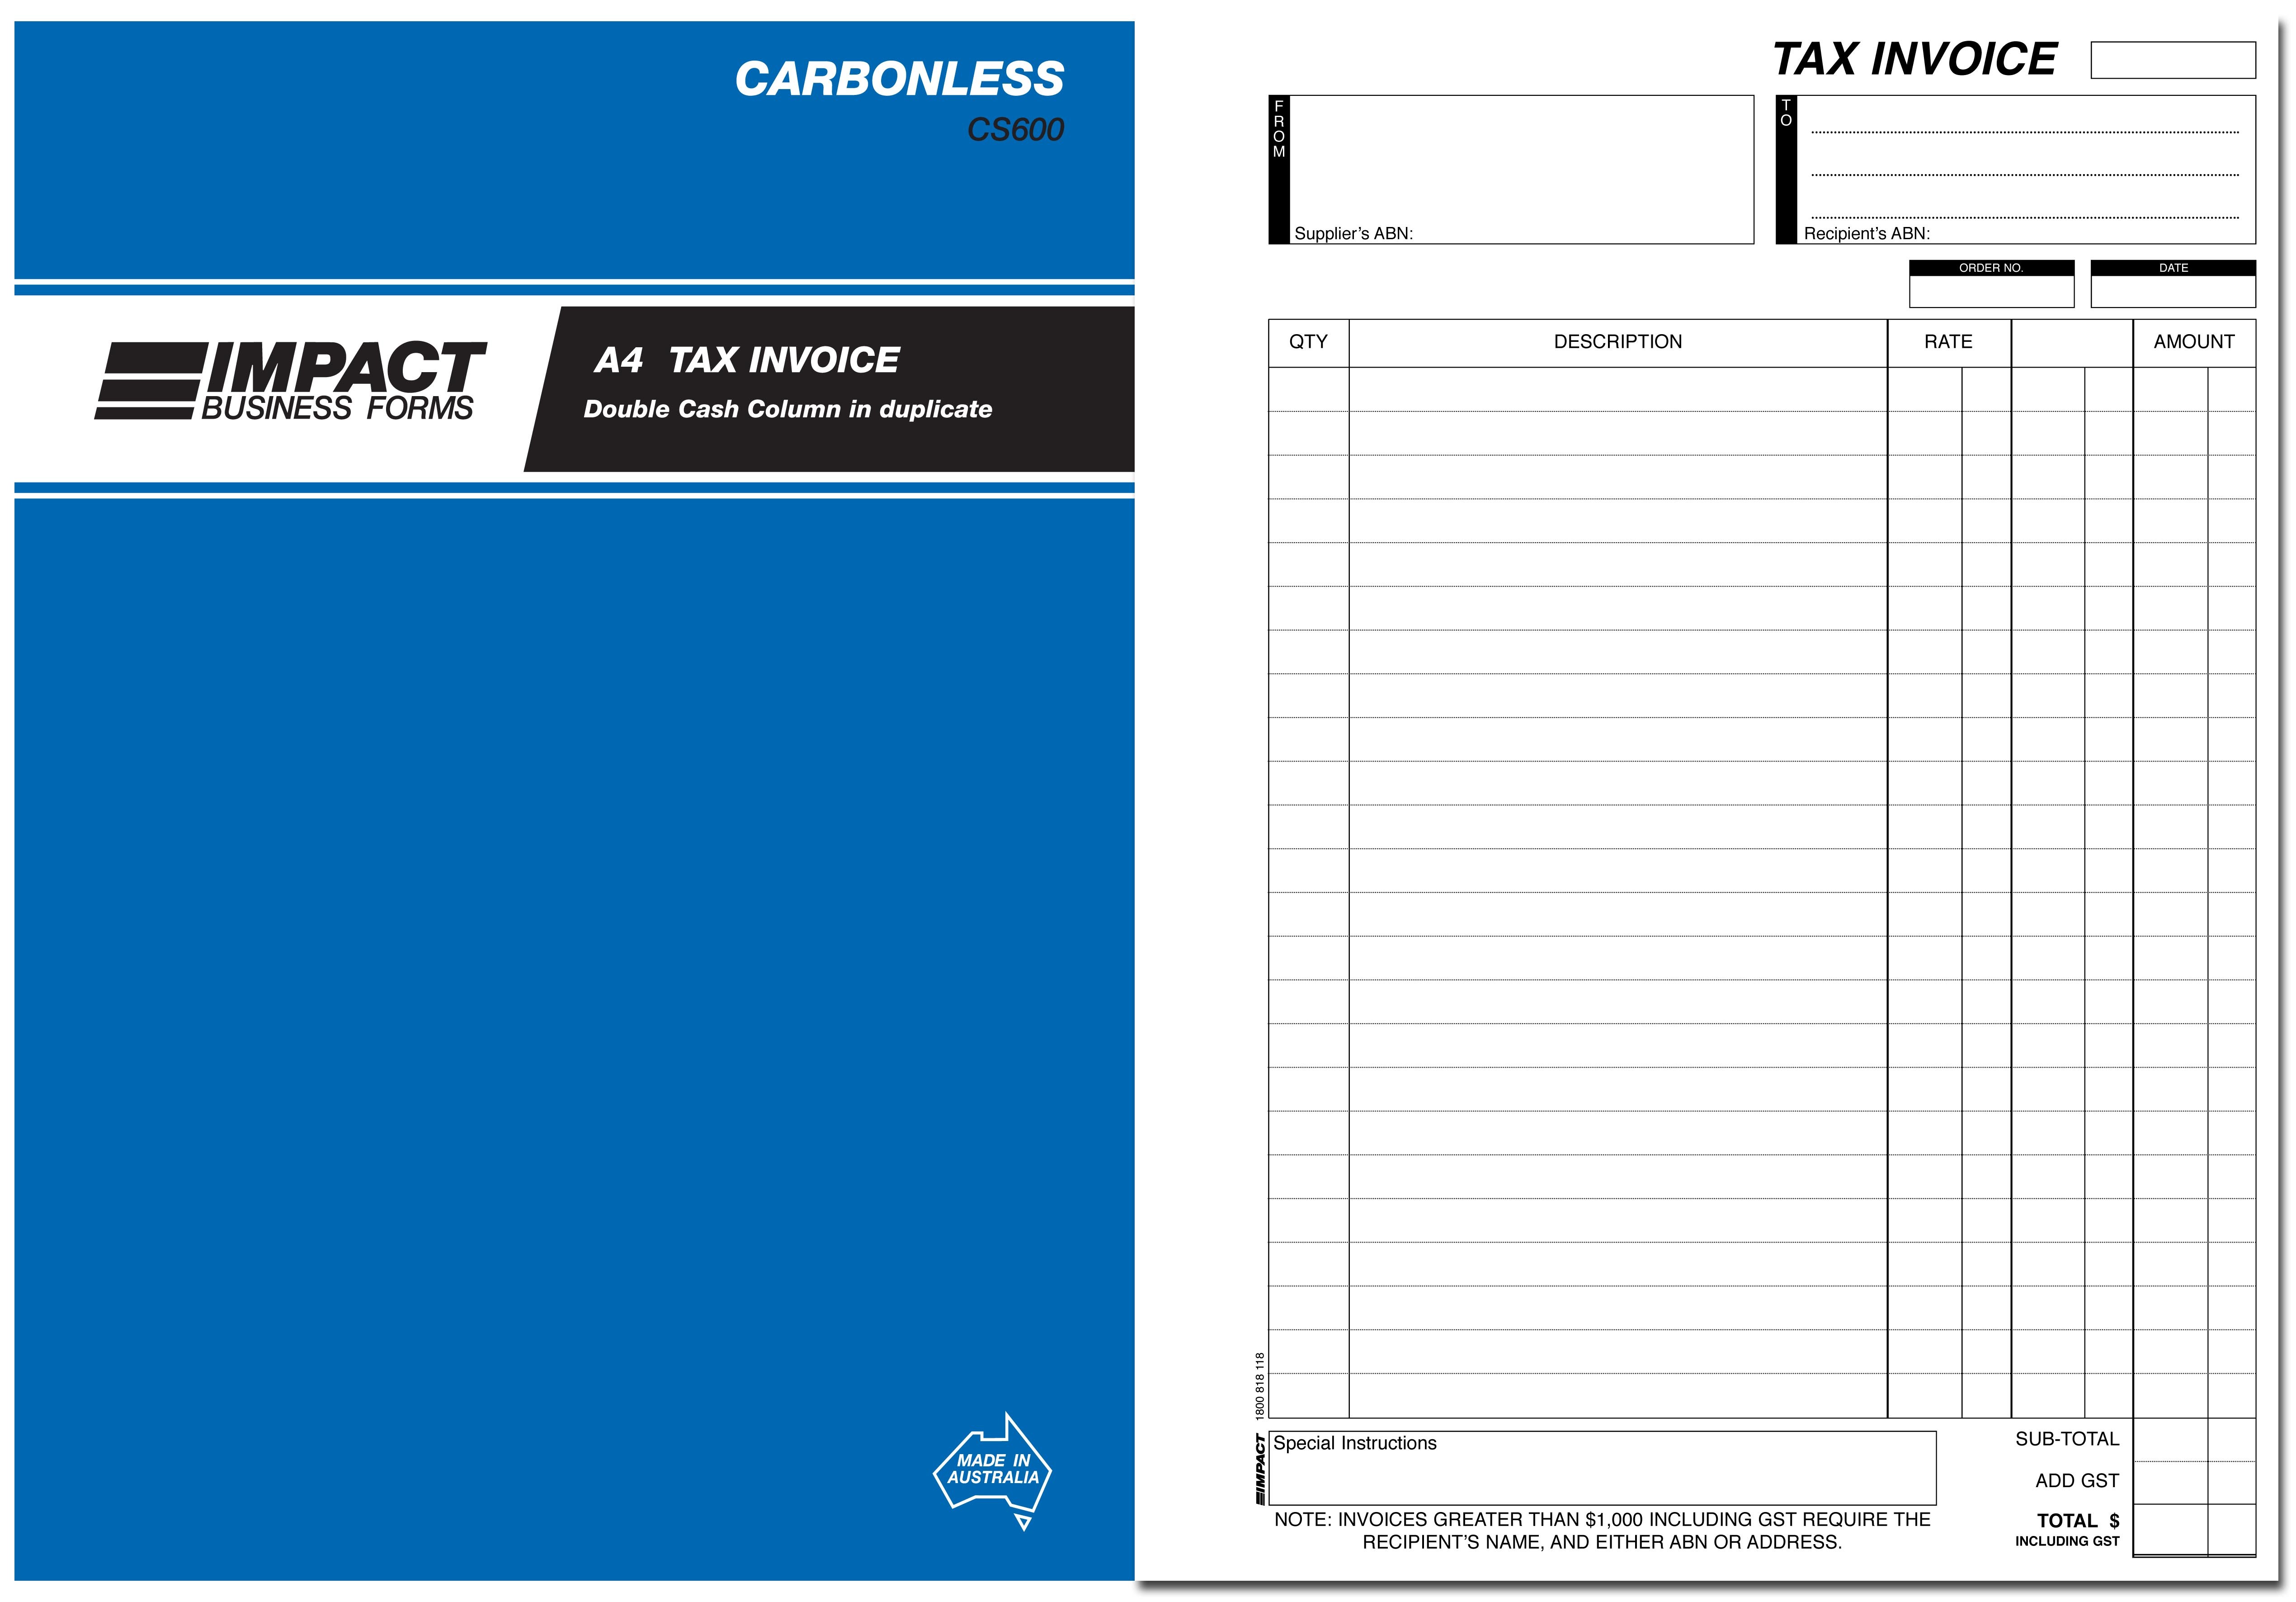 IMPACT CARBONLESS TAX INVOICE BOOK A4 DUP. CS-600 (price excludes gst)